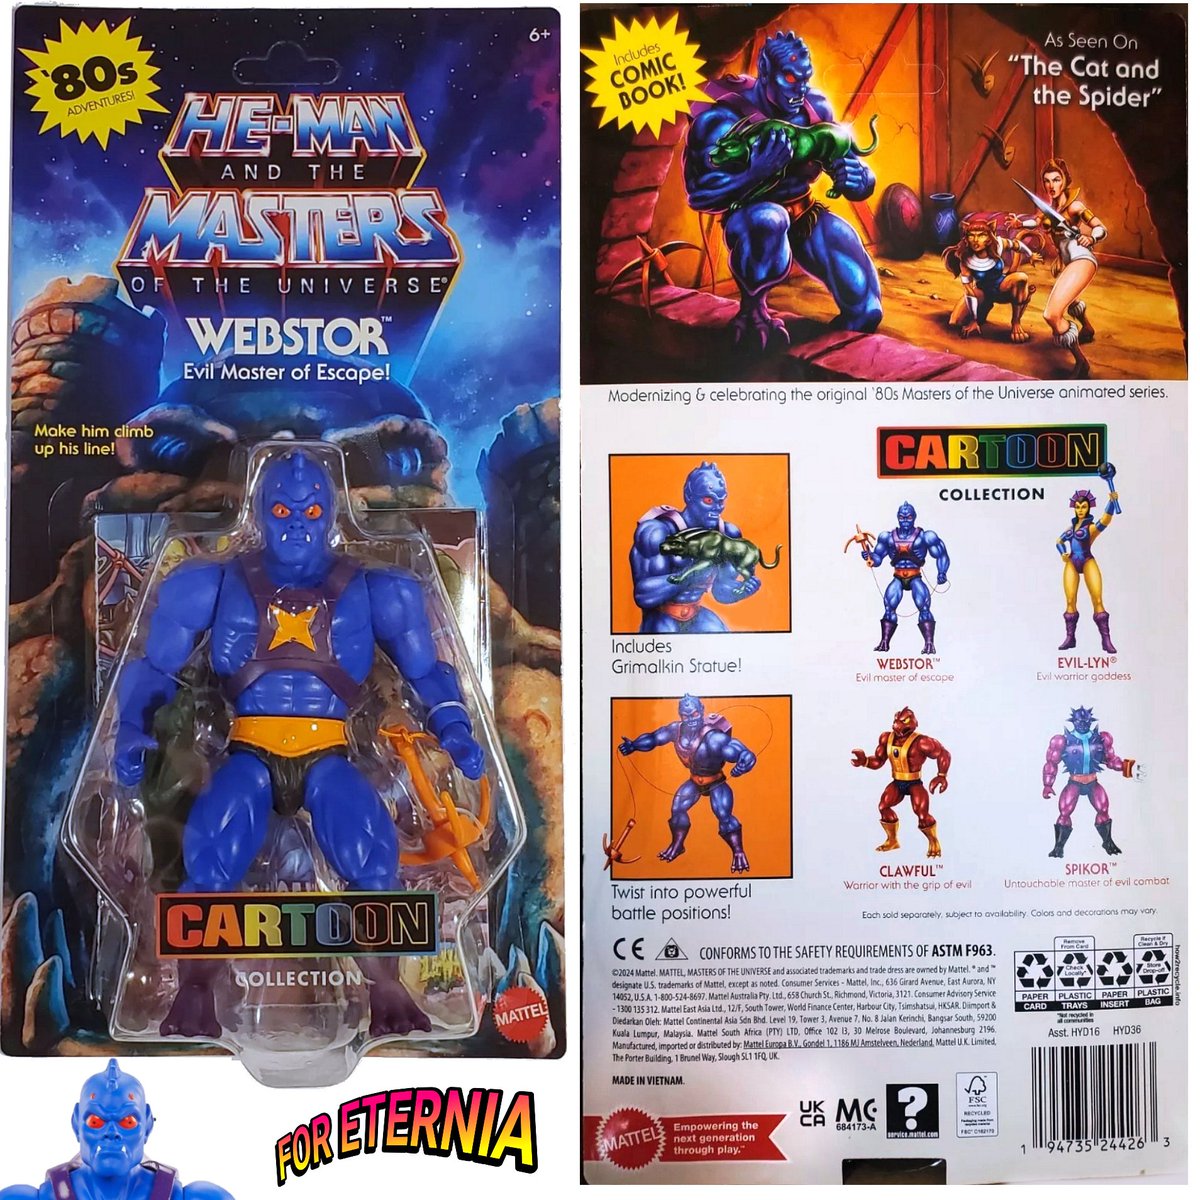 Full packaging reveal for the upcoming Masters of the Universe: Origins “Cartoon Collection ” Webstor figure. #MastersoftheUniverse #MOTU #MOTUOrigins #CartoonCollection